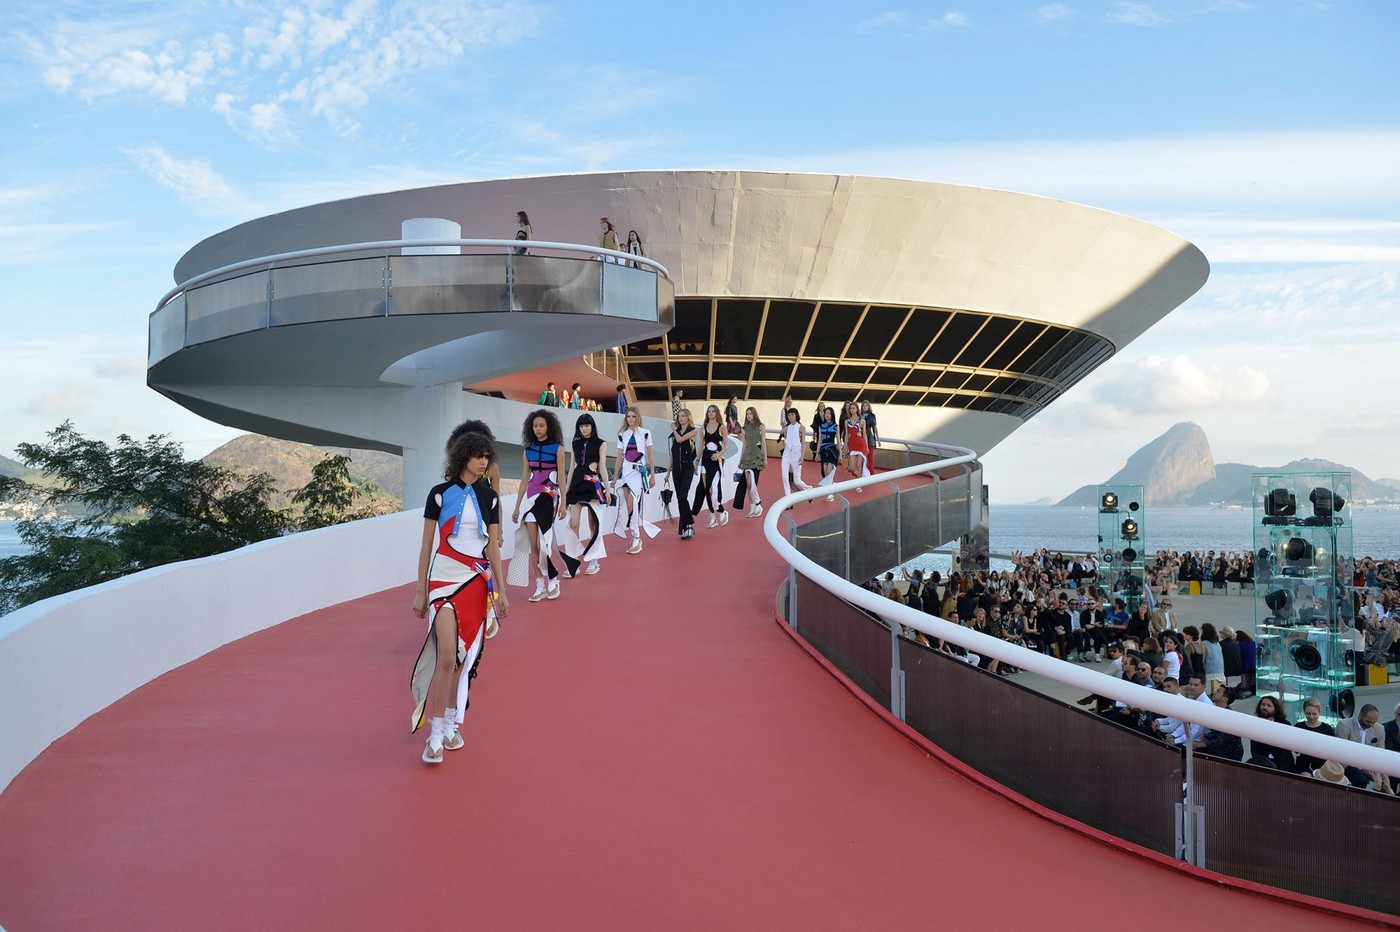 Louis Vuitton Takes On Rio With Its 2017 Cruise Collection